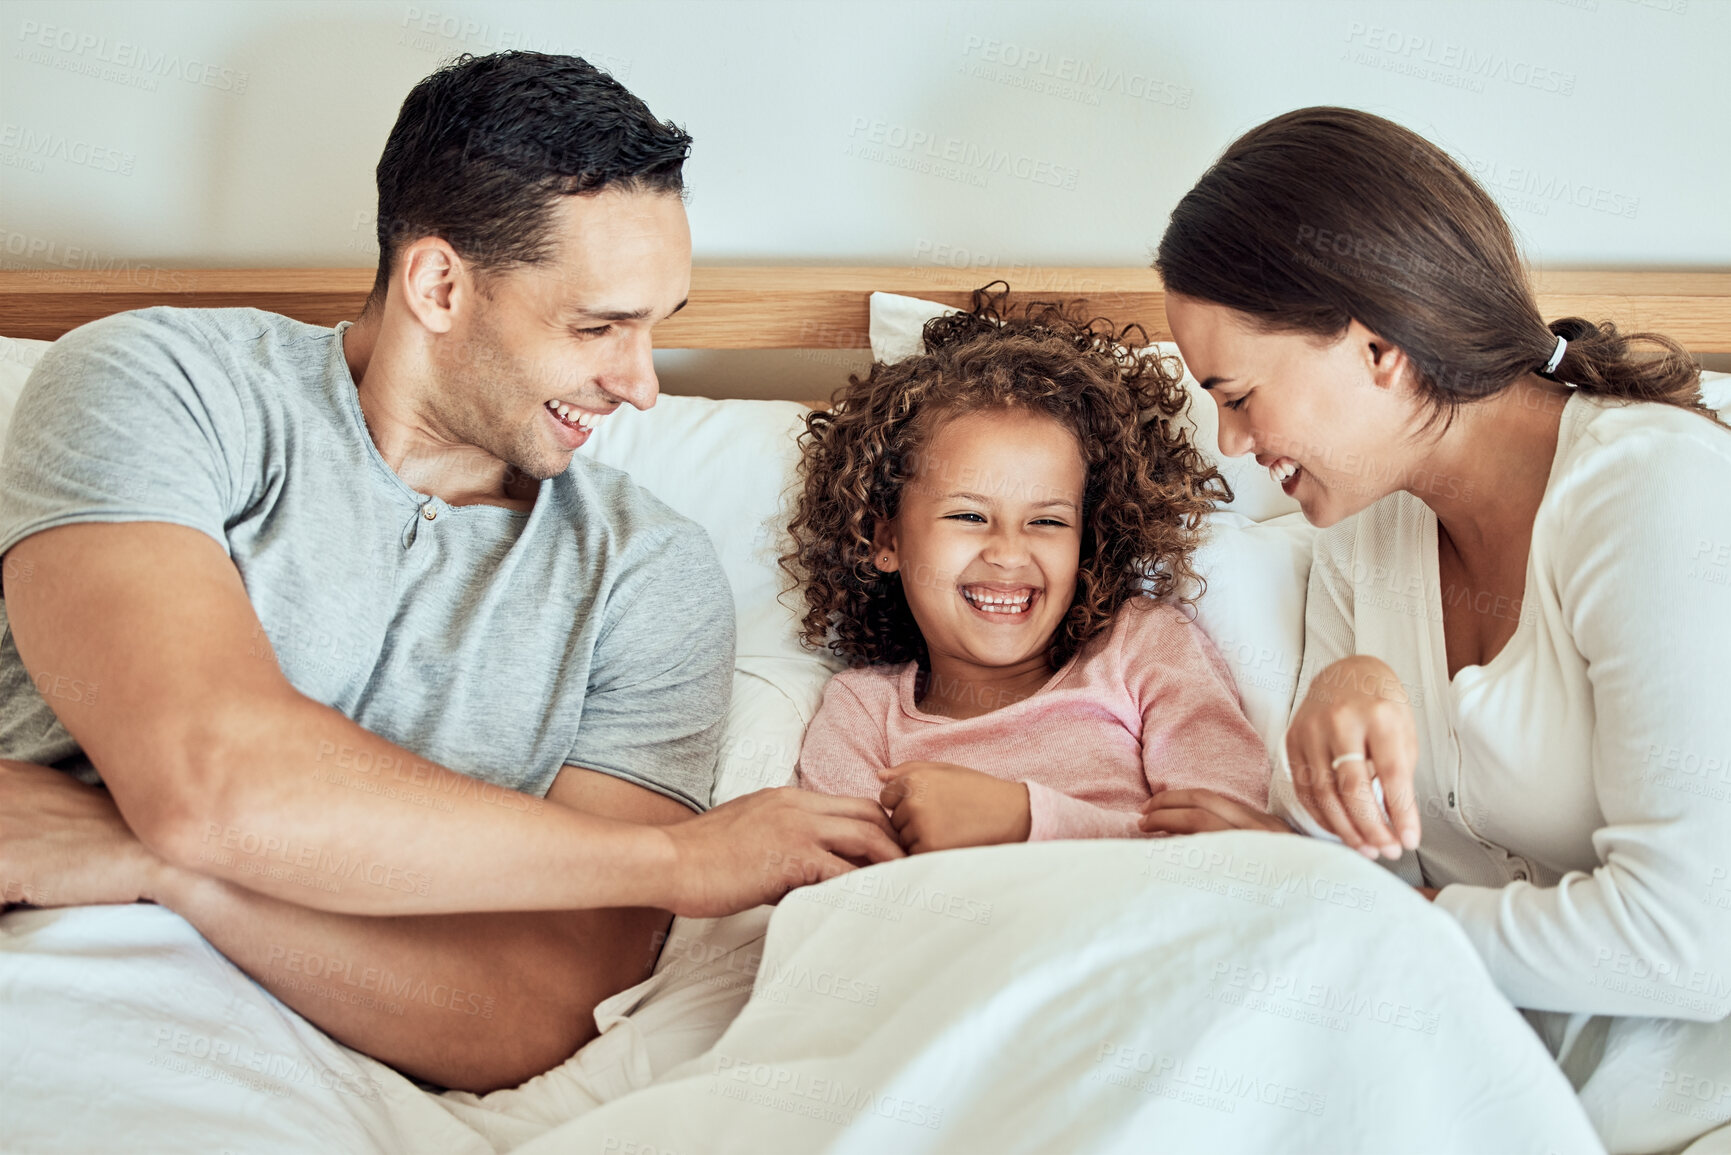 Buy stock photo Playful parents tickling their little daughter while lying in bed together. Cheerful couple bonding with their adorable little girl at home in the morning. Cute little girl laughing while playing with mom and dad. Waking up happy